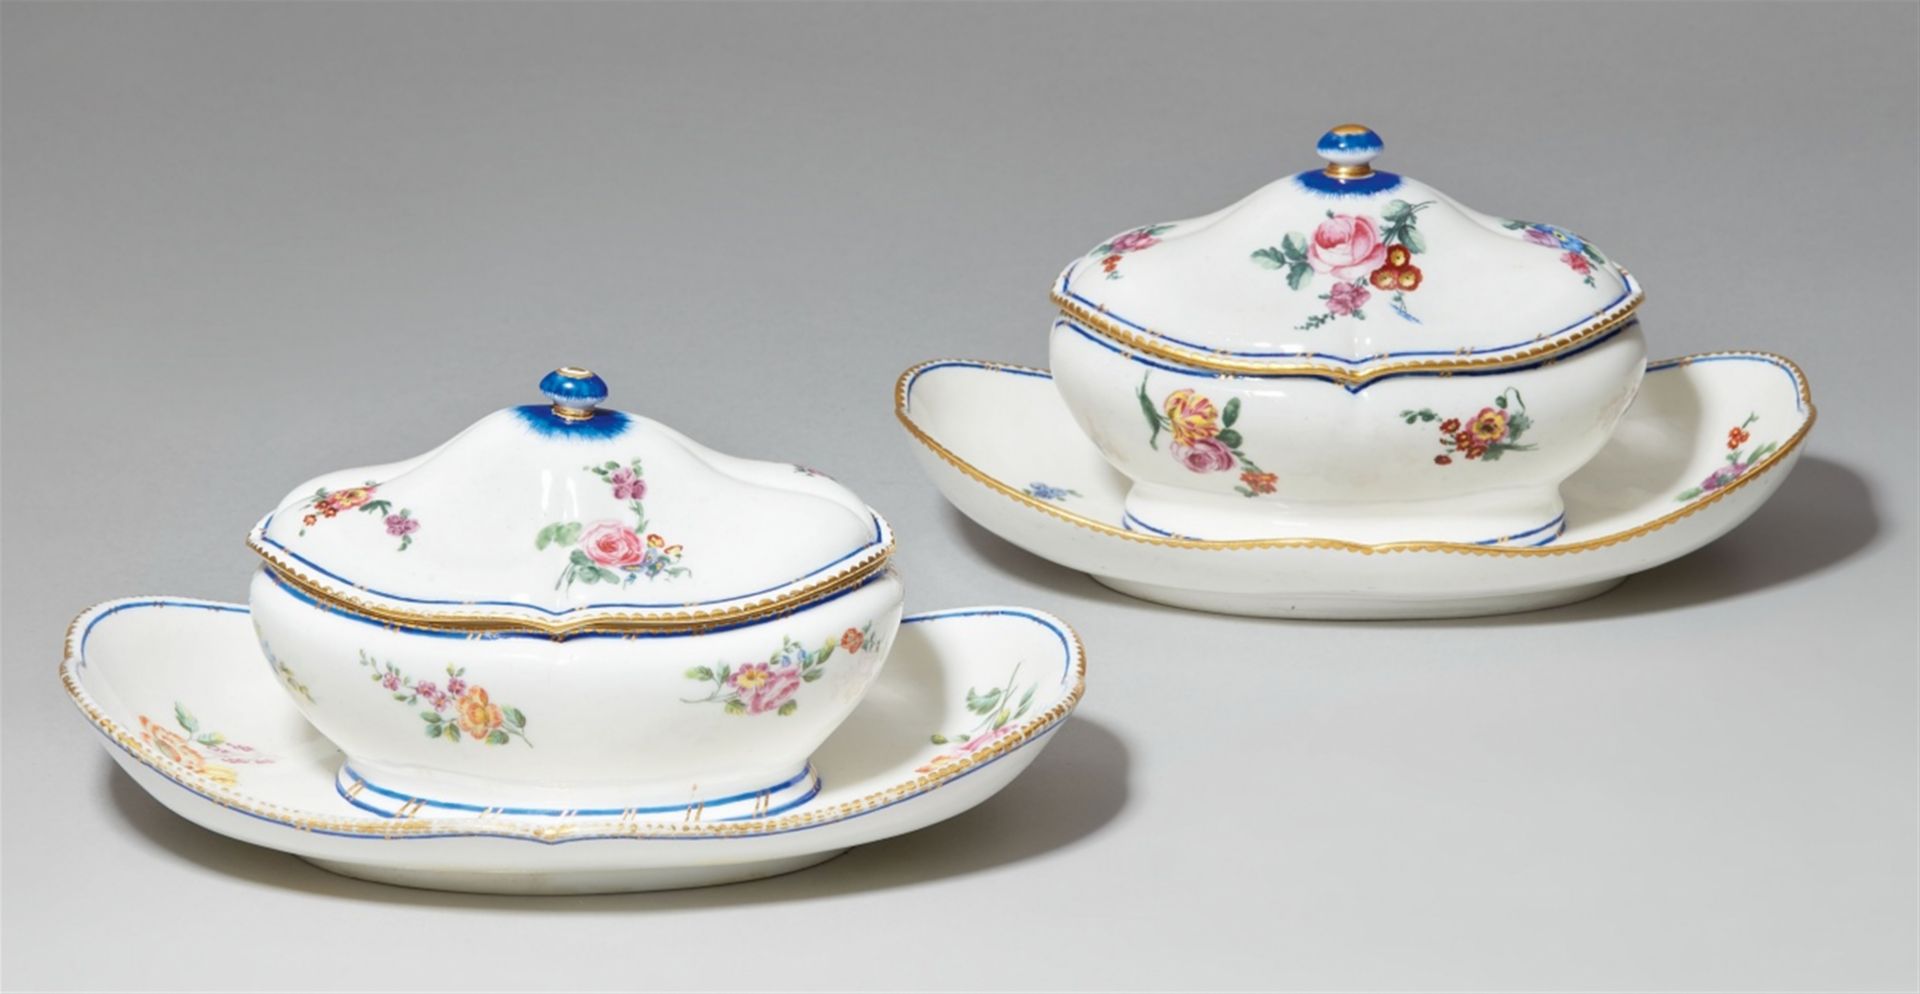 Two Sèvres soft-paste porcelain sugar boxes and covers with flowers